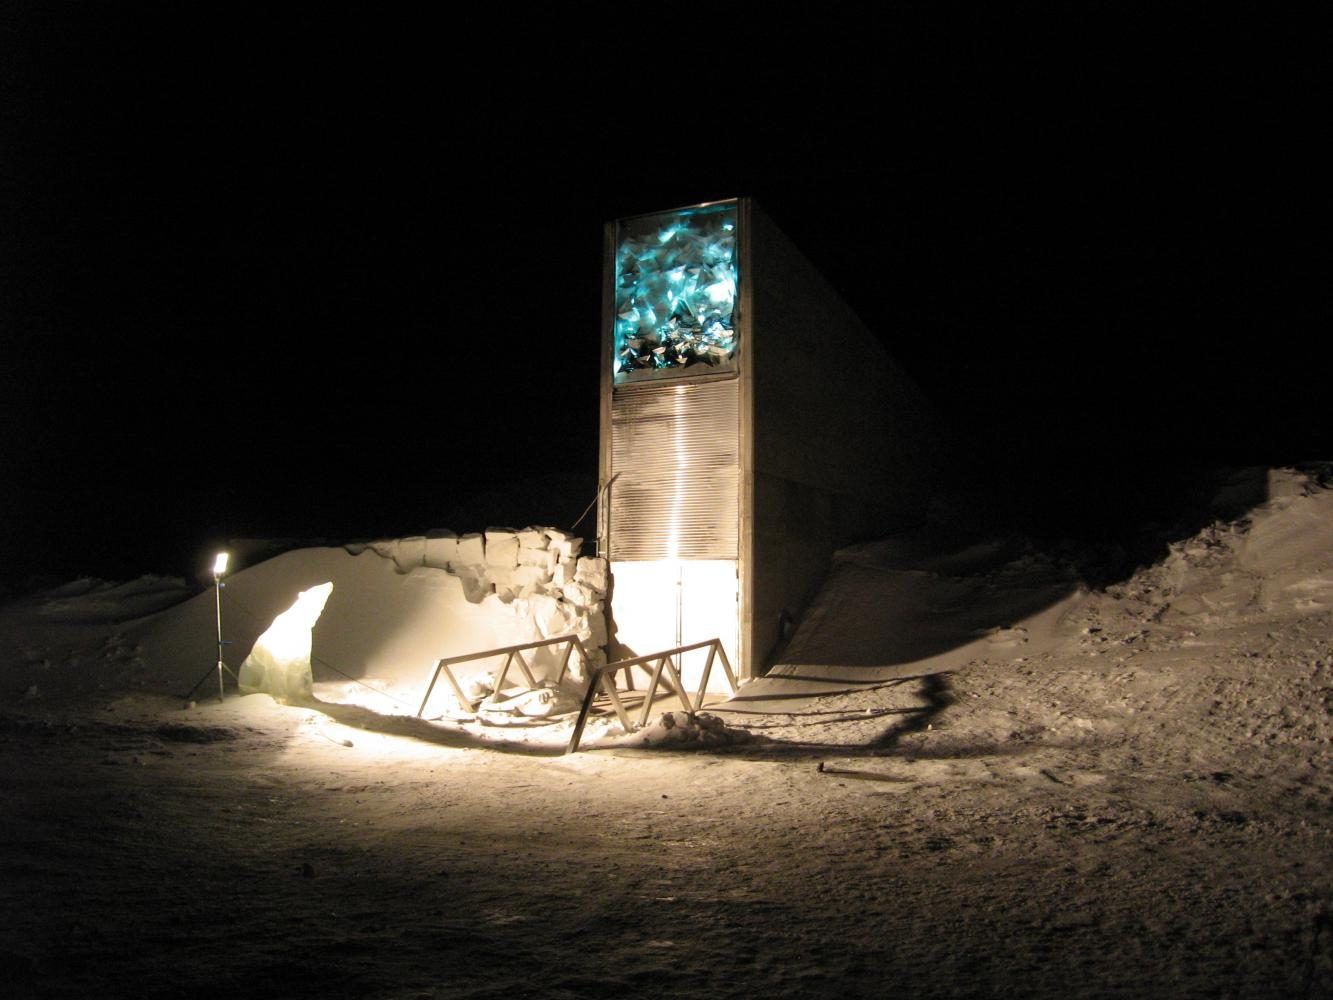 Water Damages Doomsday Seed Vault